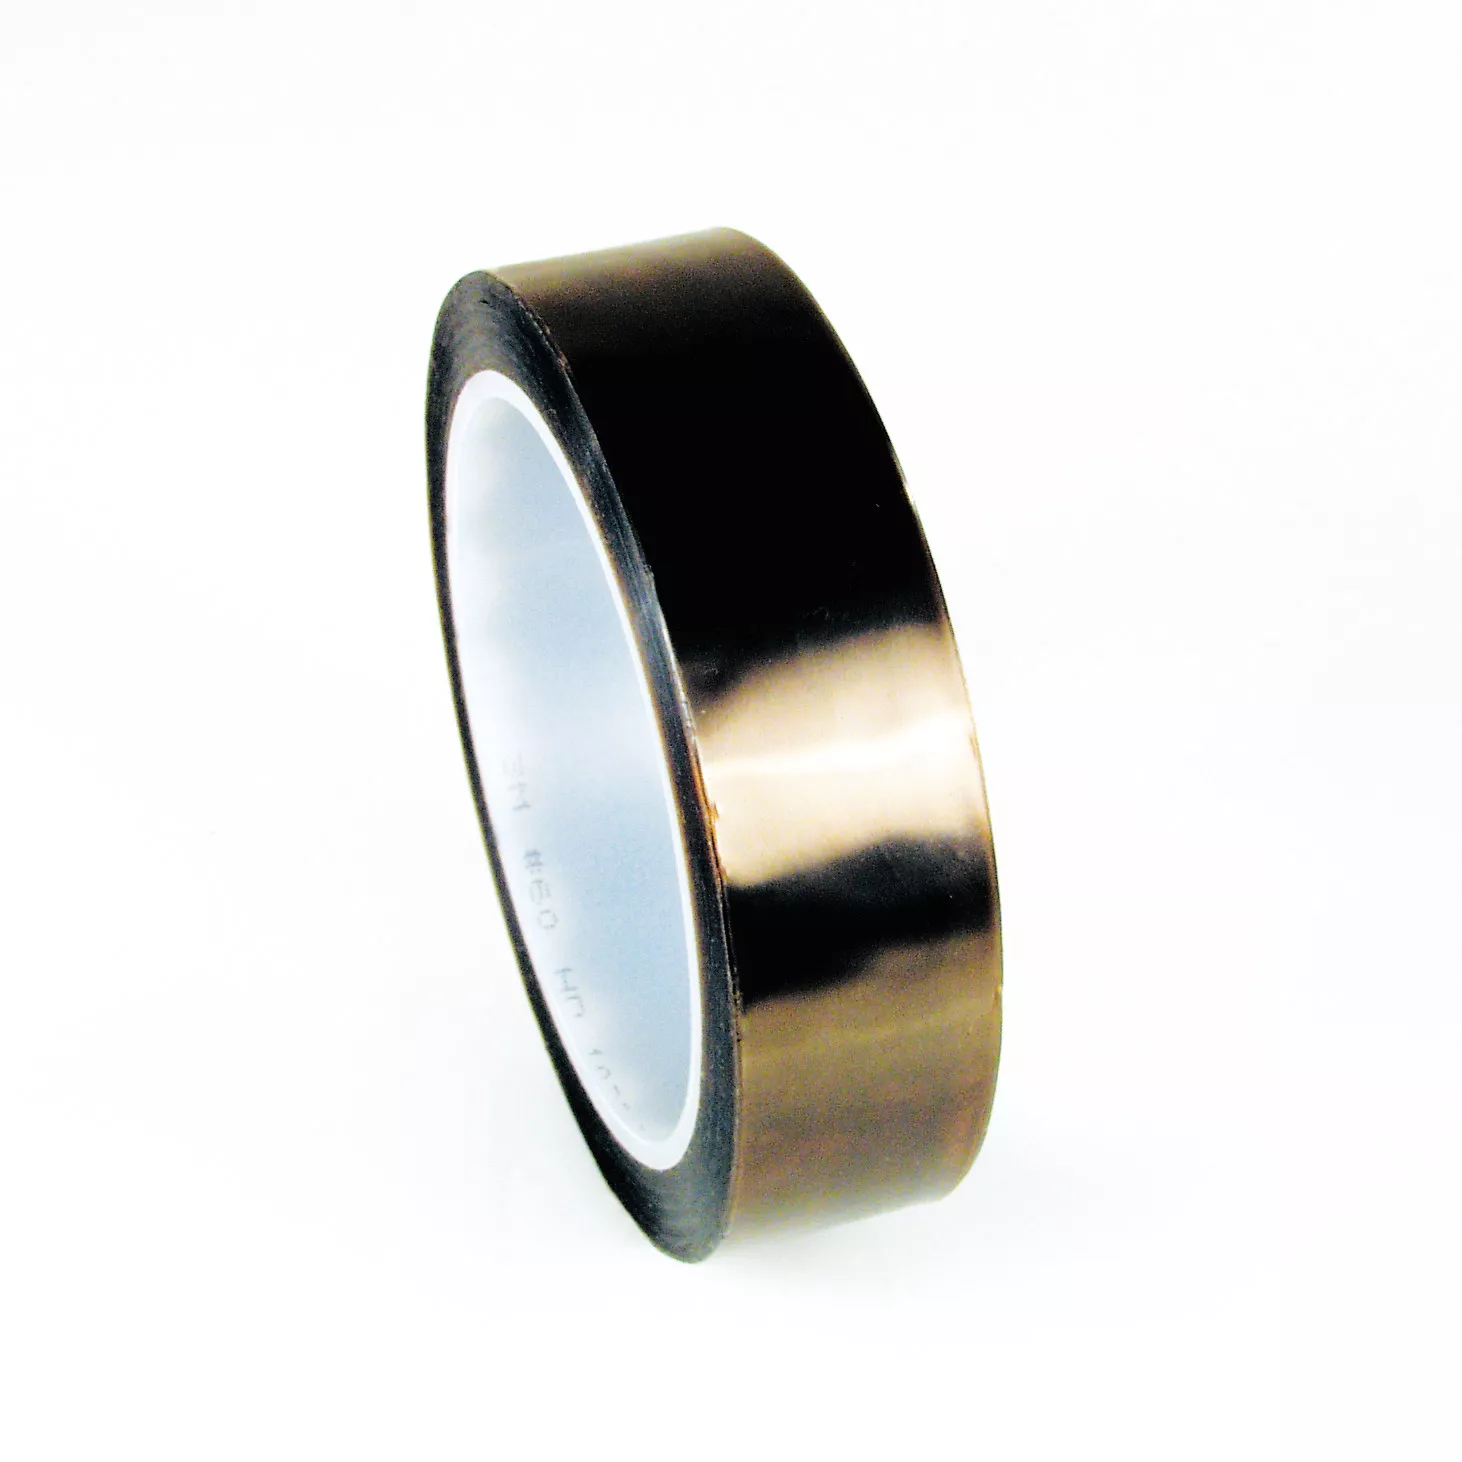 3M™ PTFE Film Electrical Tape 61, 14 in x 36 yd (35,6 cm x 33 m), Log
roll Untrimmed, 1 Roll/Case